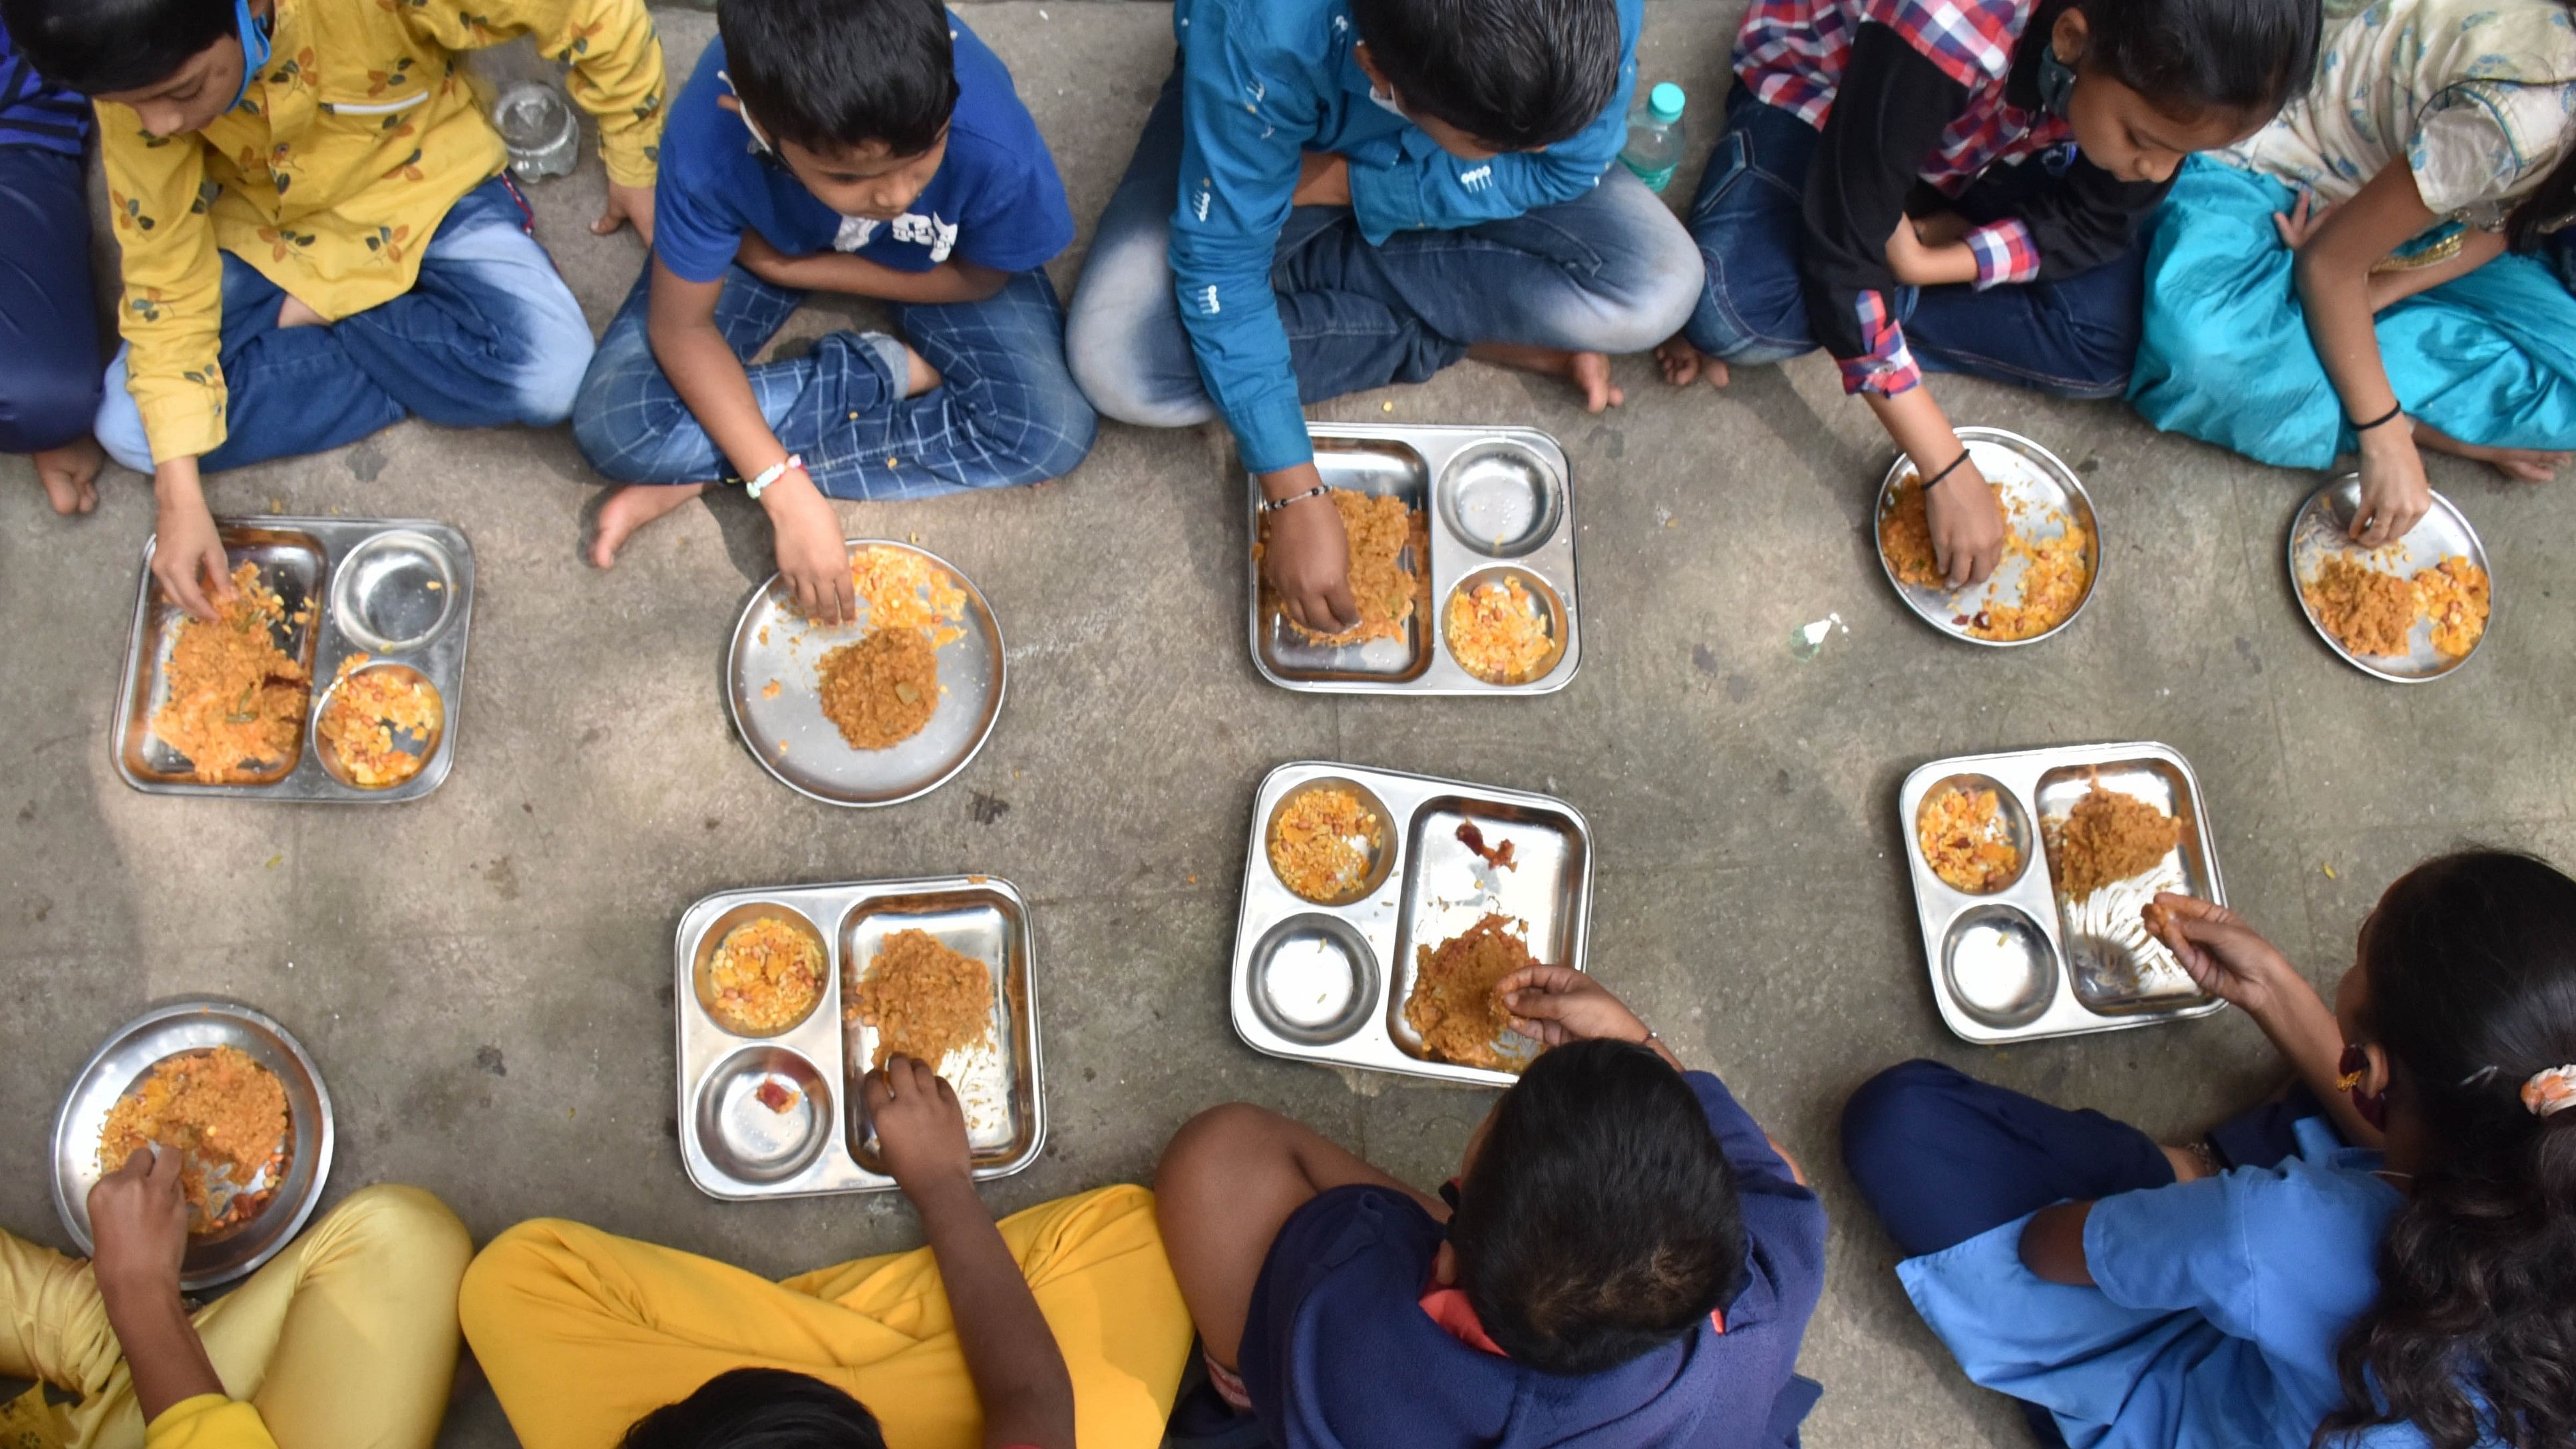 <div class="paragraphs"><p>Representative image showing children eating their midday meals</p></div>